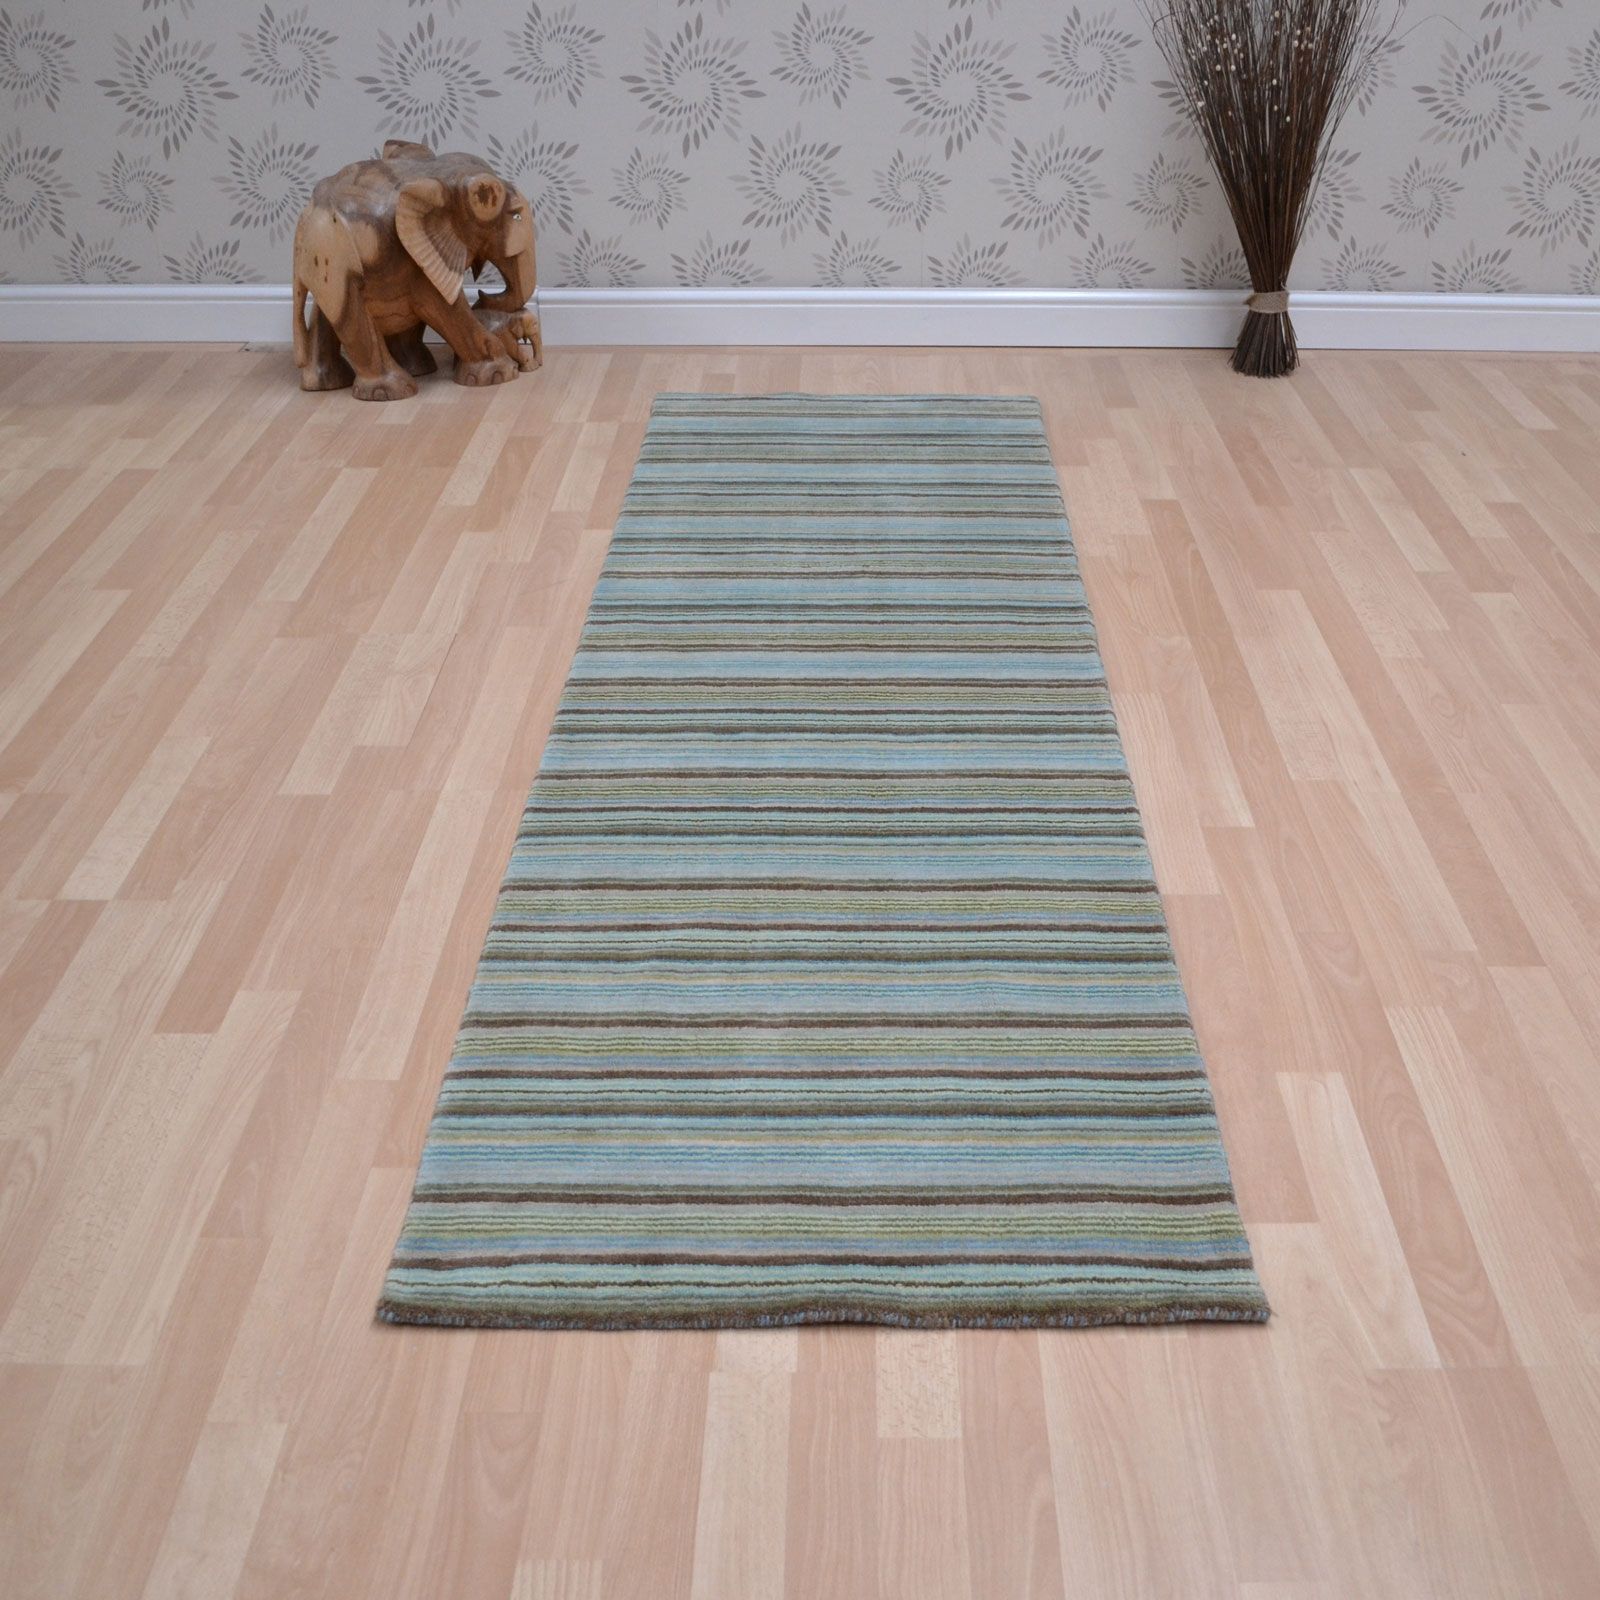 Joseph Hallway Runners In Blue Green Free Uk Delivery The Rug Regarding Hallway Runners Green (View 3 of 20)